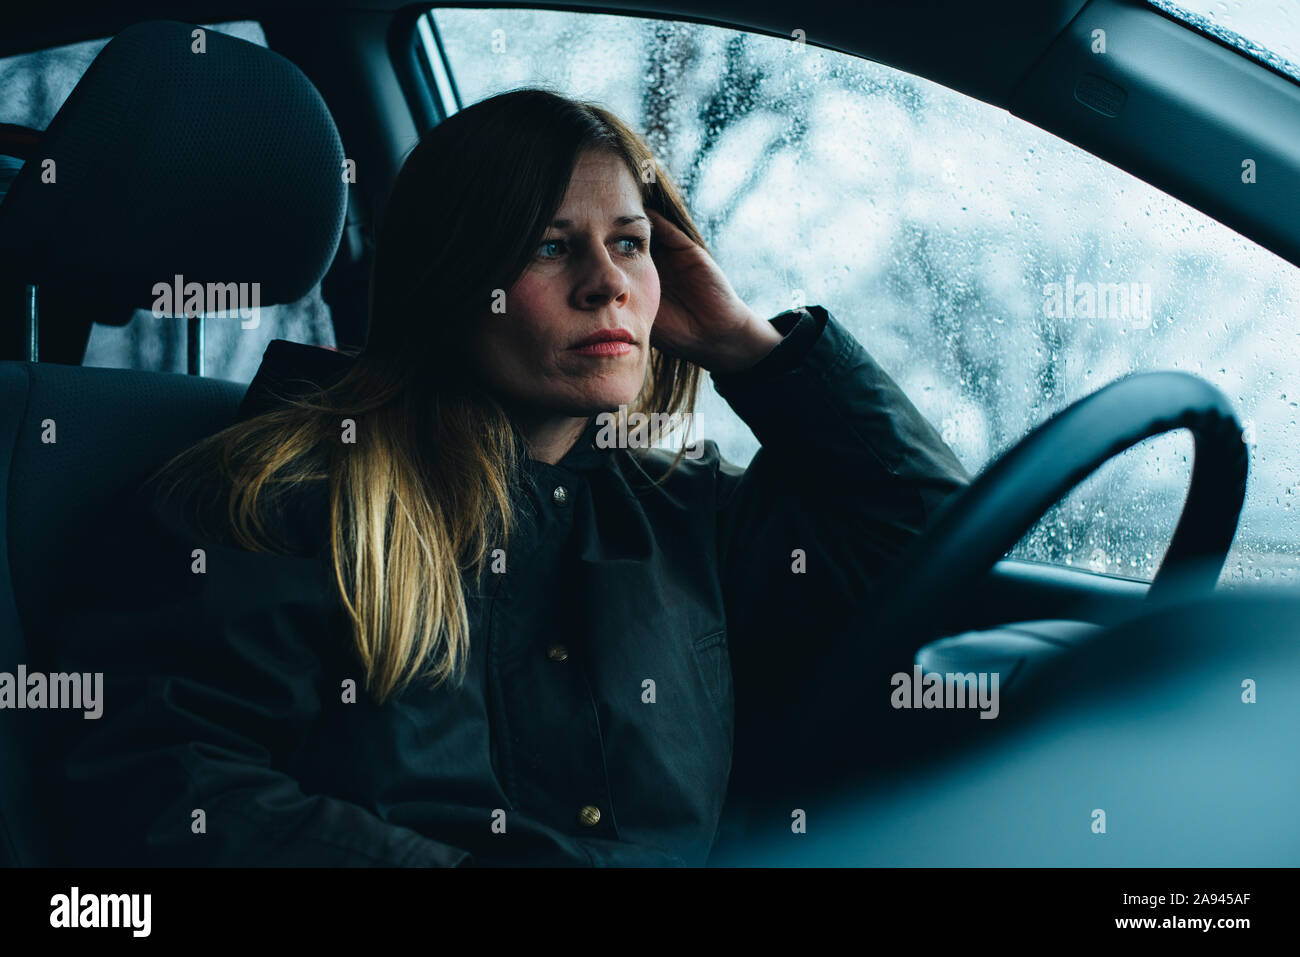 A woman sits in a car. Stock Photo